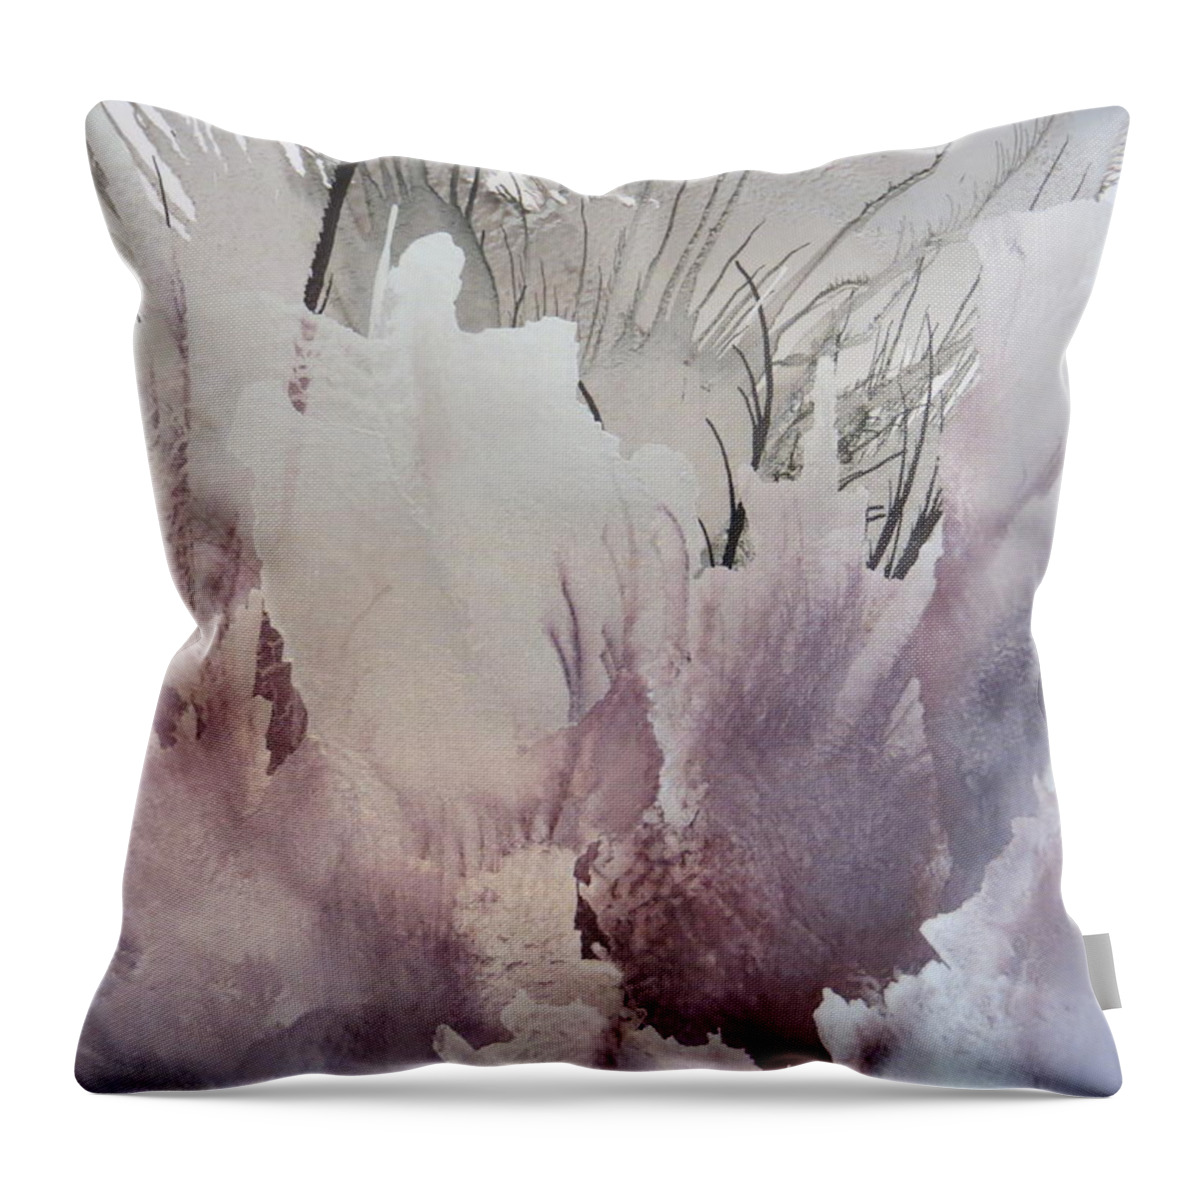 Abstract Throw Pillow featuring the painting One Moment by Soraya Silvestri